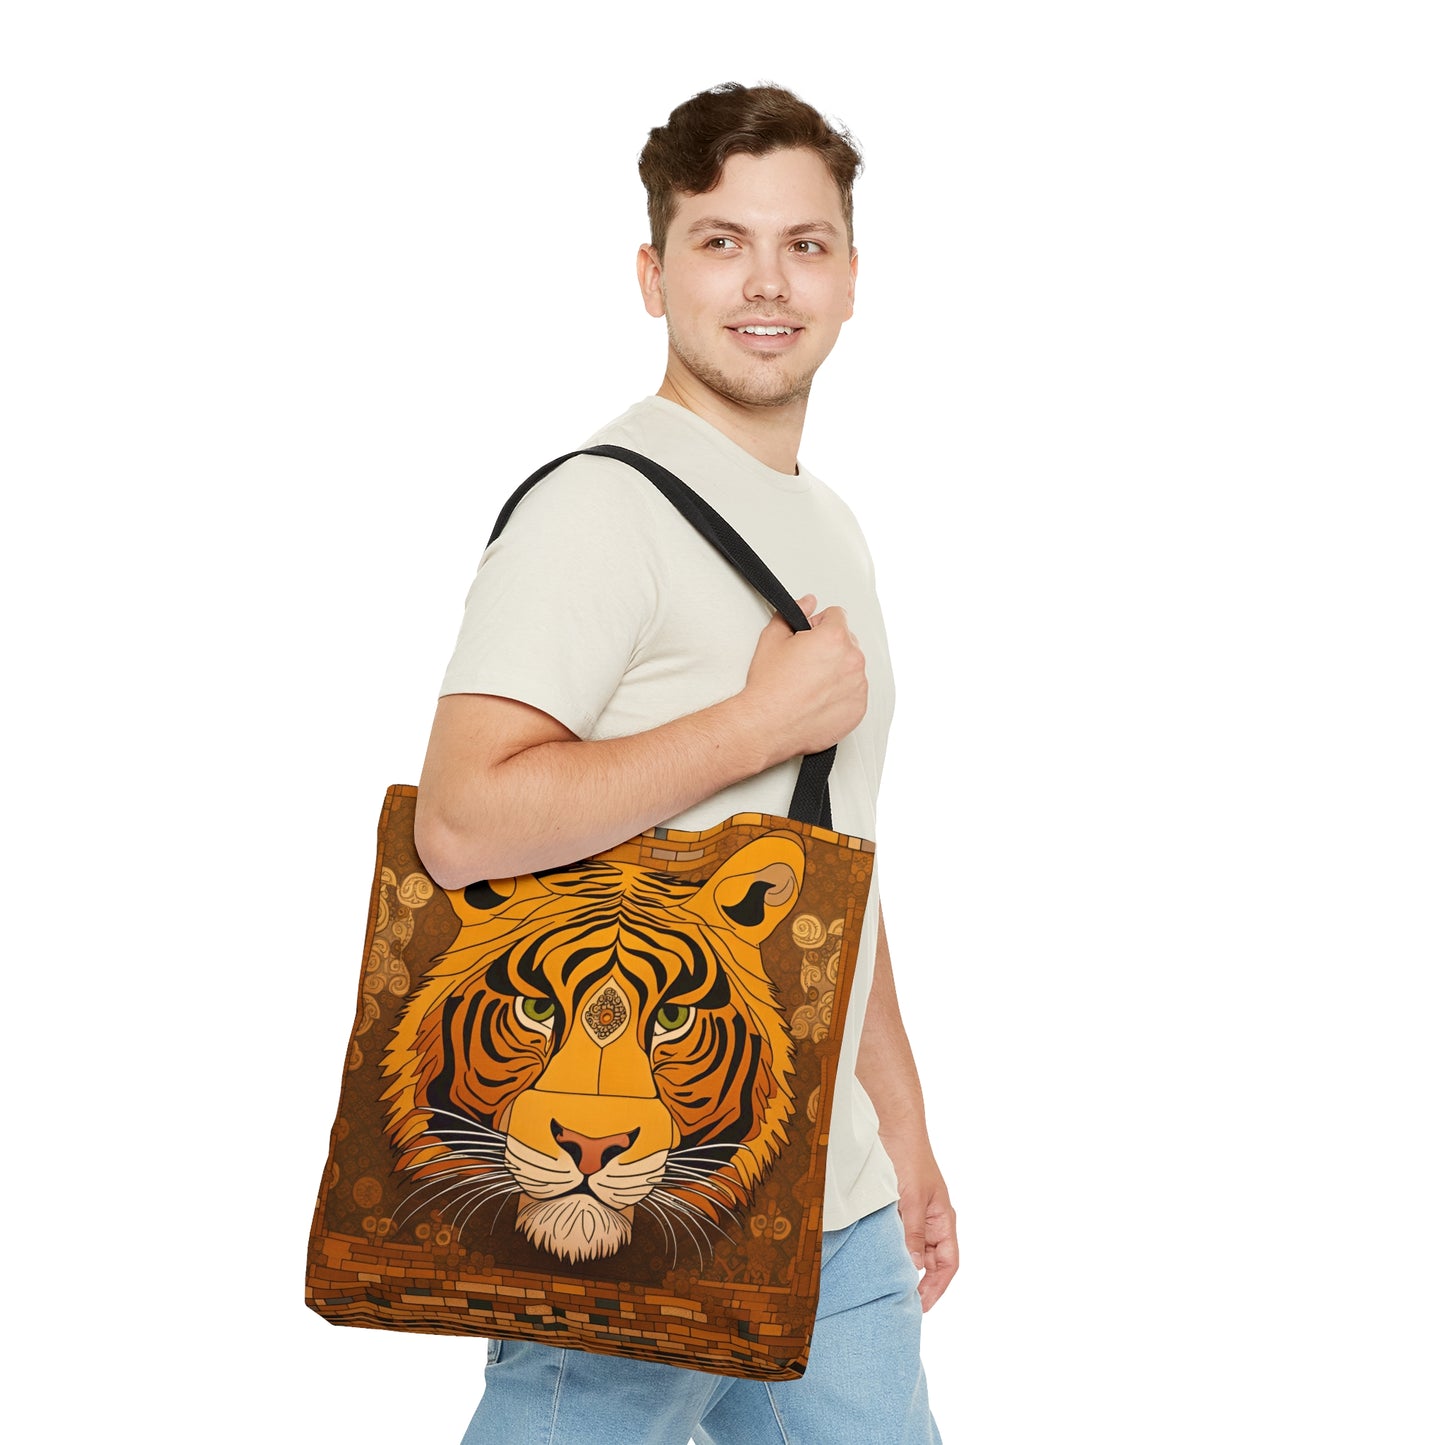 Tiger Themed Bags and Purses - Tiger Head in the Style of Gustav Klimt Printed on Tote Bag - 3 sizes